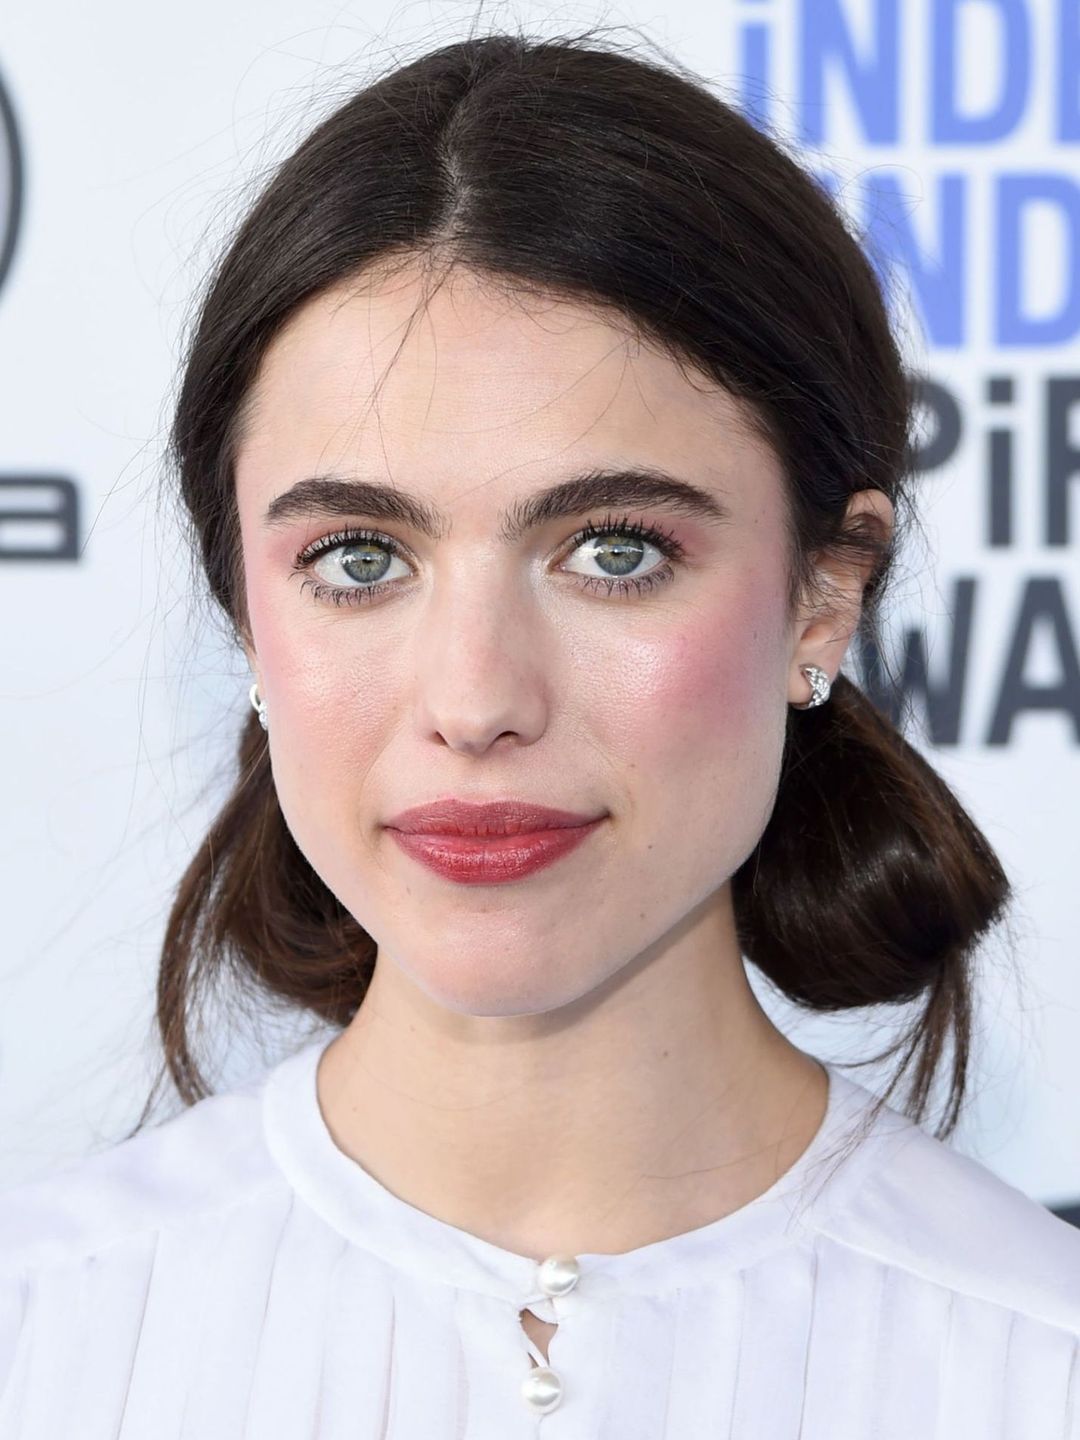 Margaret Qualley story of success